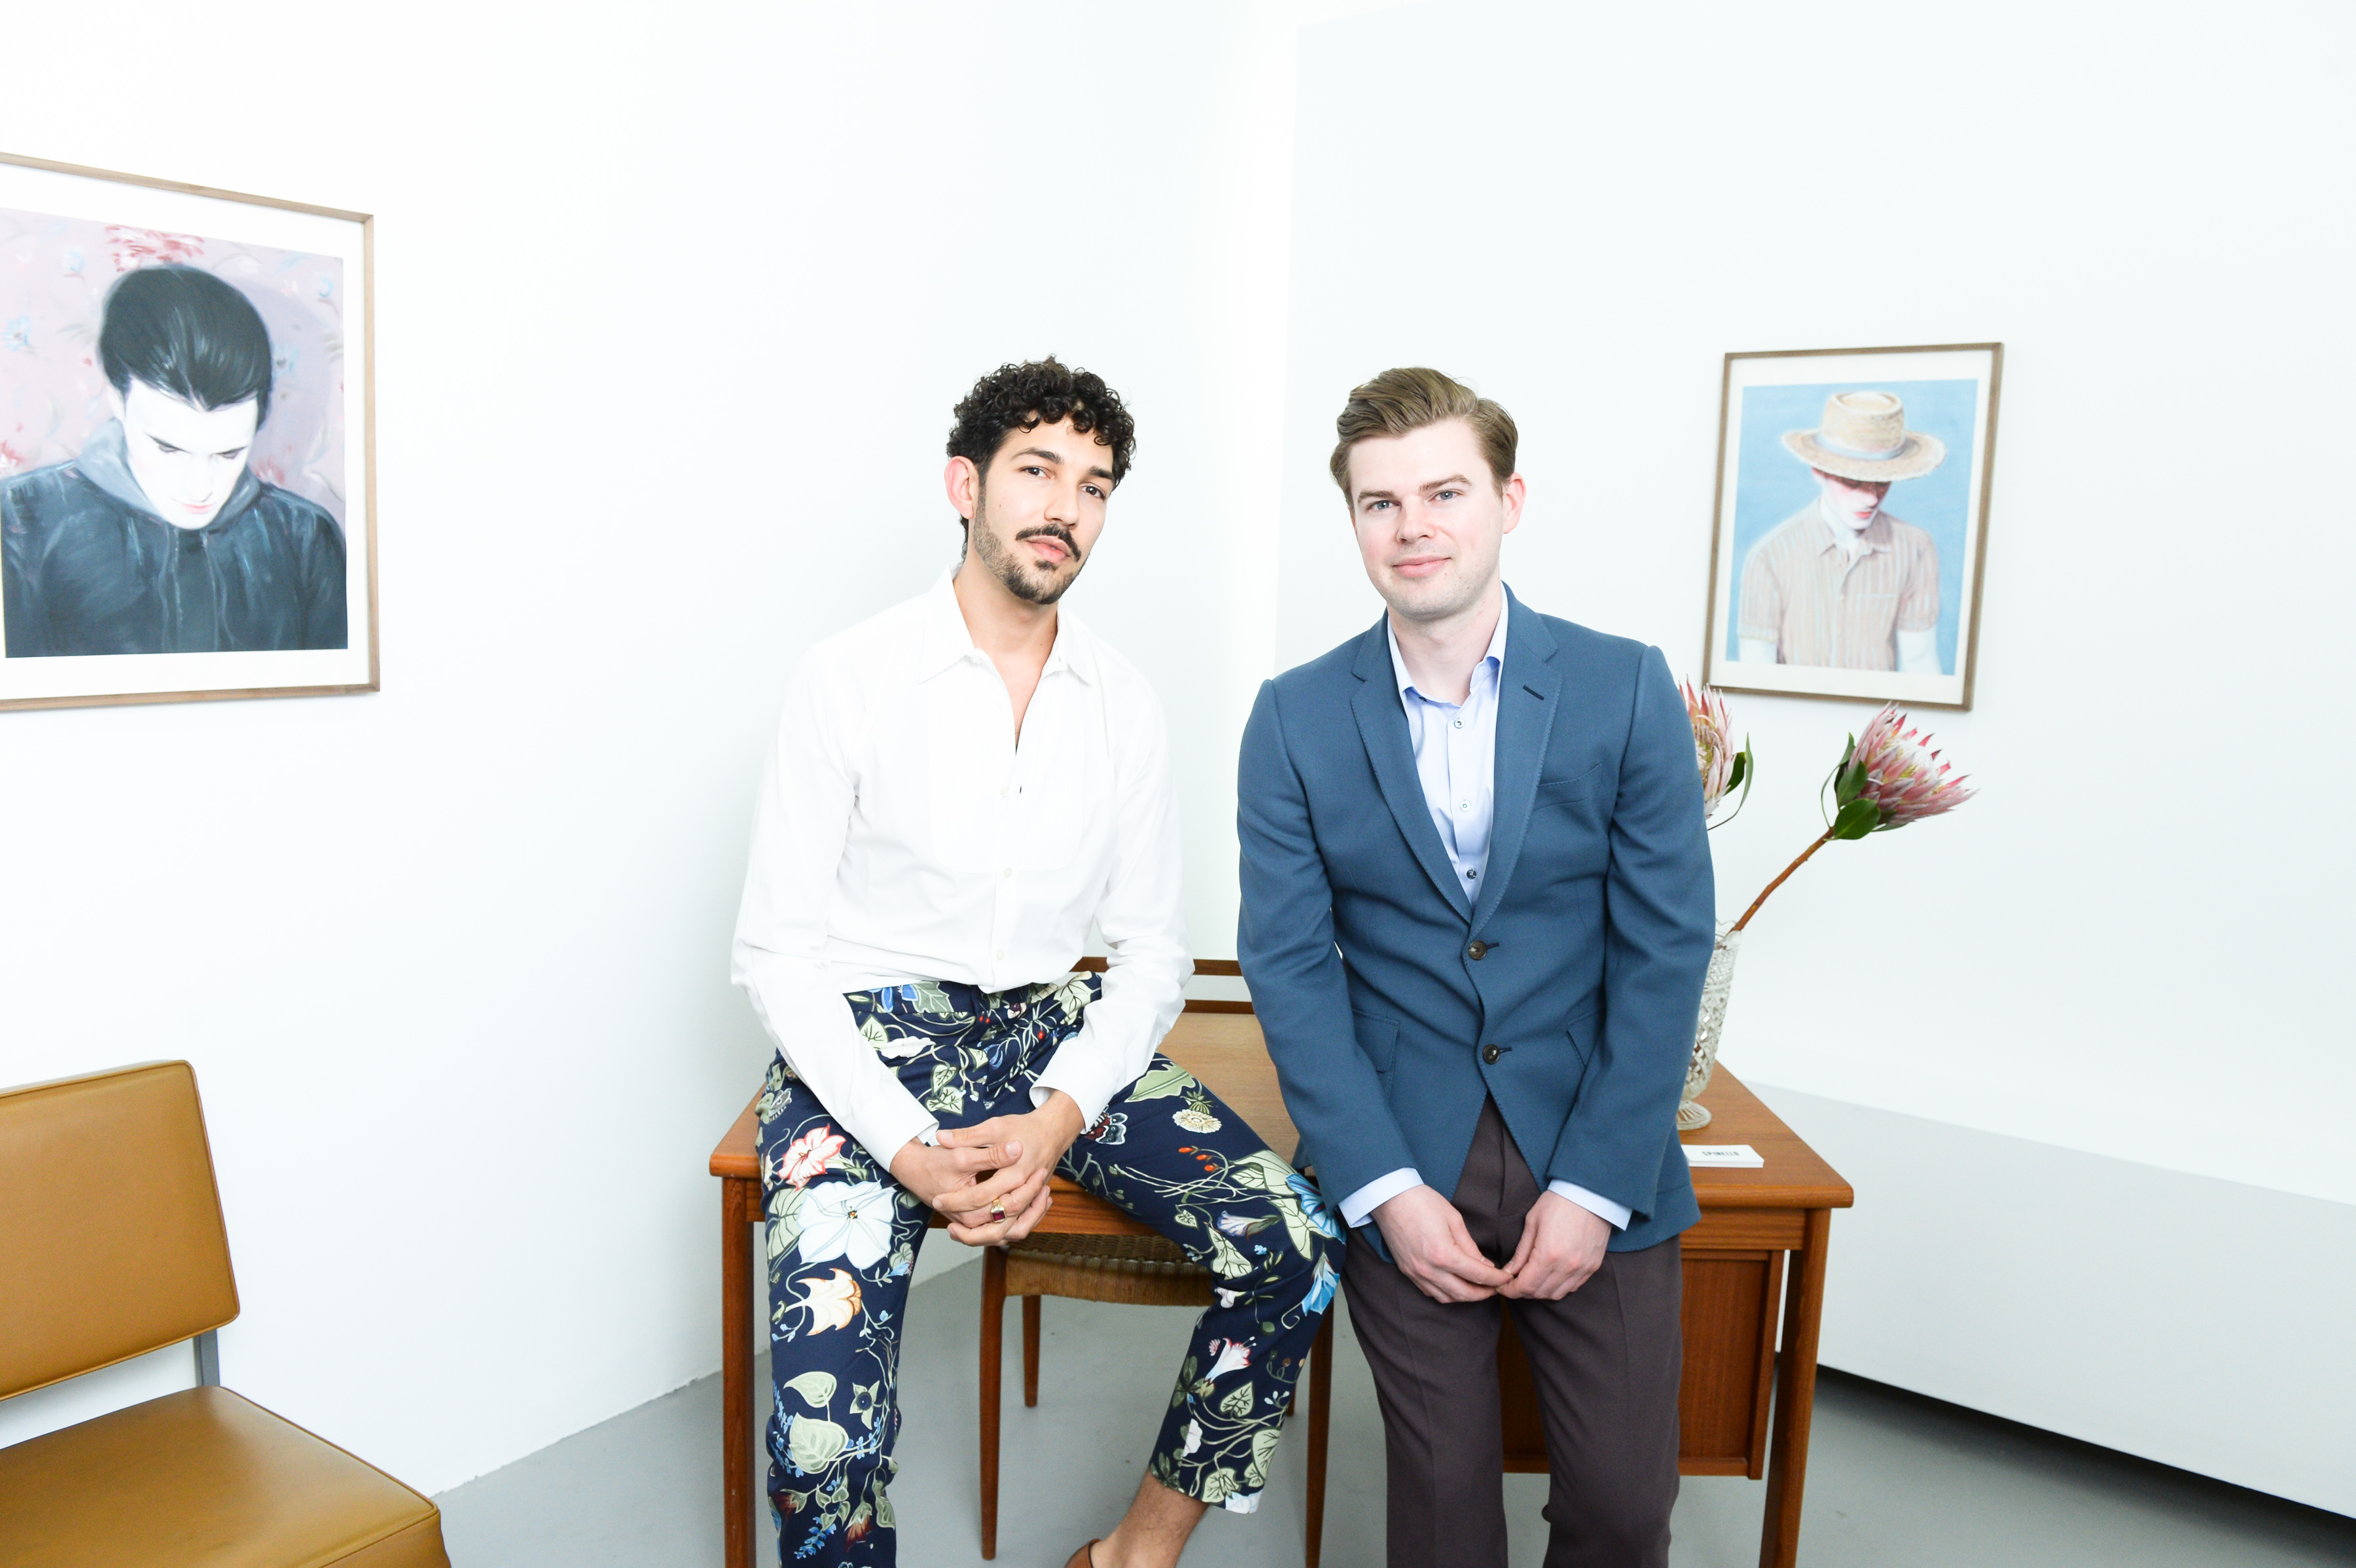 Kris Knight & Anthony Spinello - GUCCI and Spinello Projects Present Smell The Magic by Kris Knight